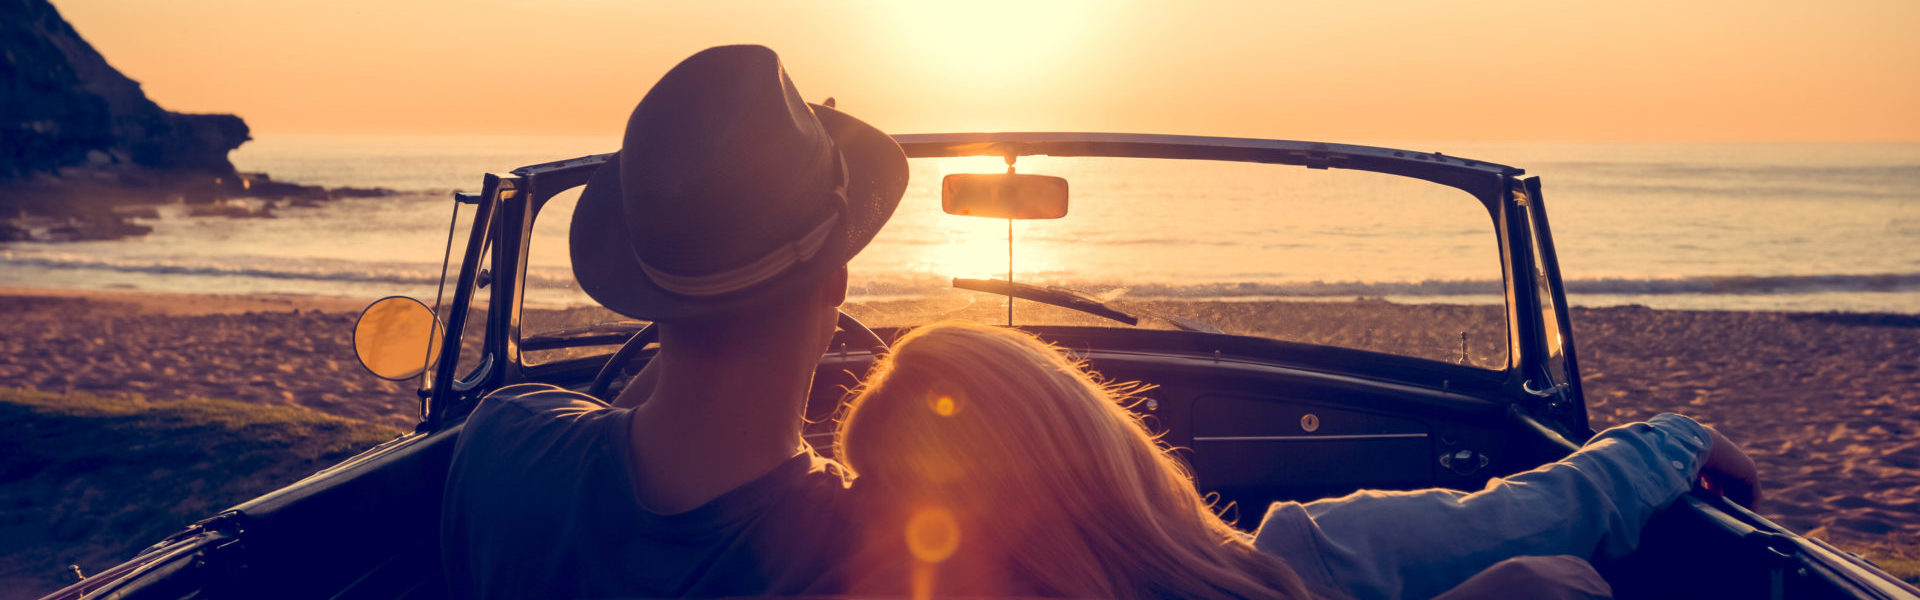 Luxury car insurance, couple watching an orange sunset over a beach in a red convertible car.